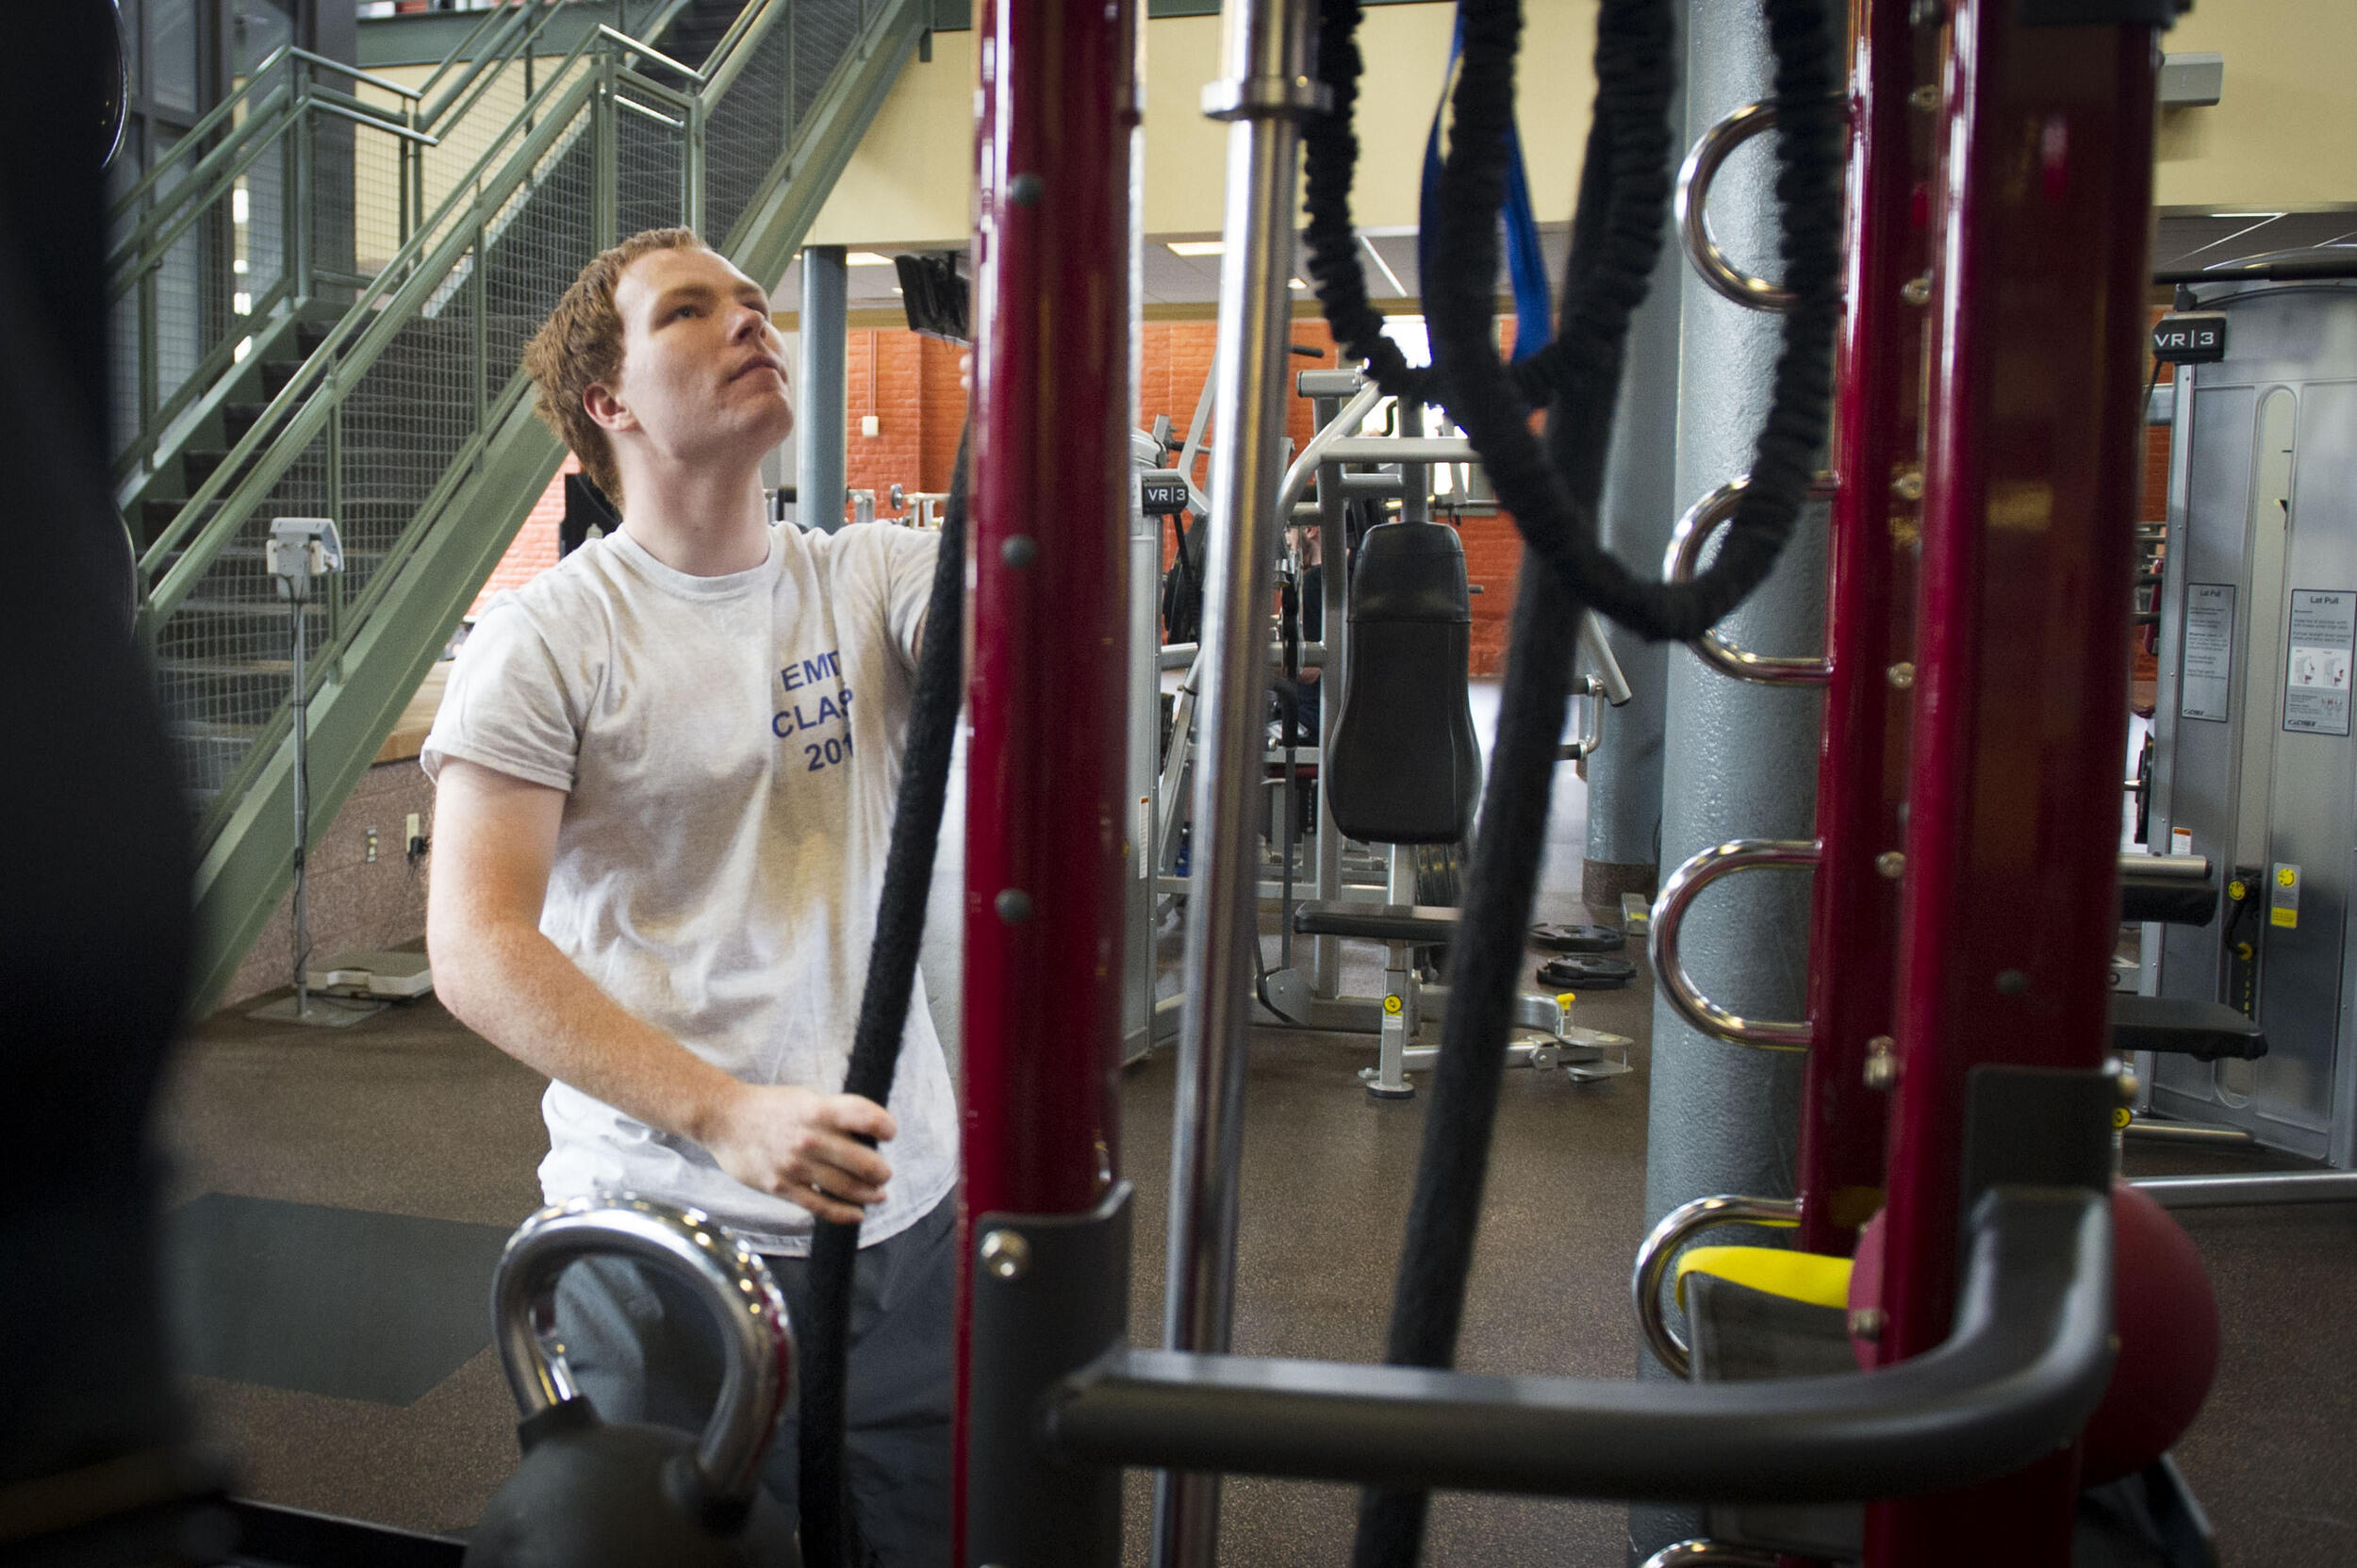 Allen, who aspires to attend medical school one day, says the workouts are good for mind and body. “It’s nice to come here and have something else to think about — because you can’t think about anything else while you’re struggling to lift heavy things," he said. (Julia Rendleman, University Marketing)